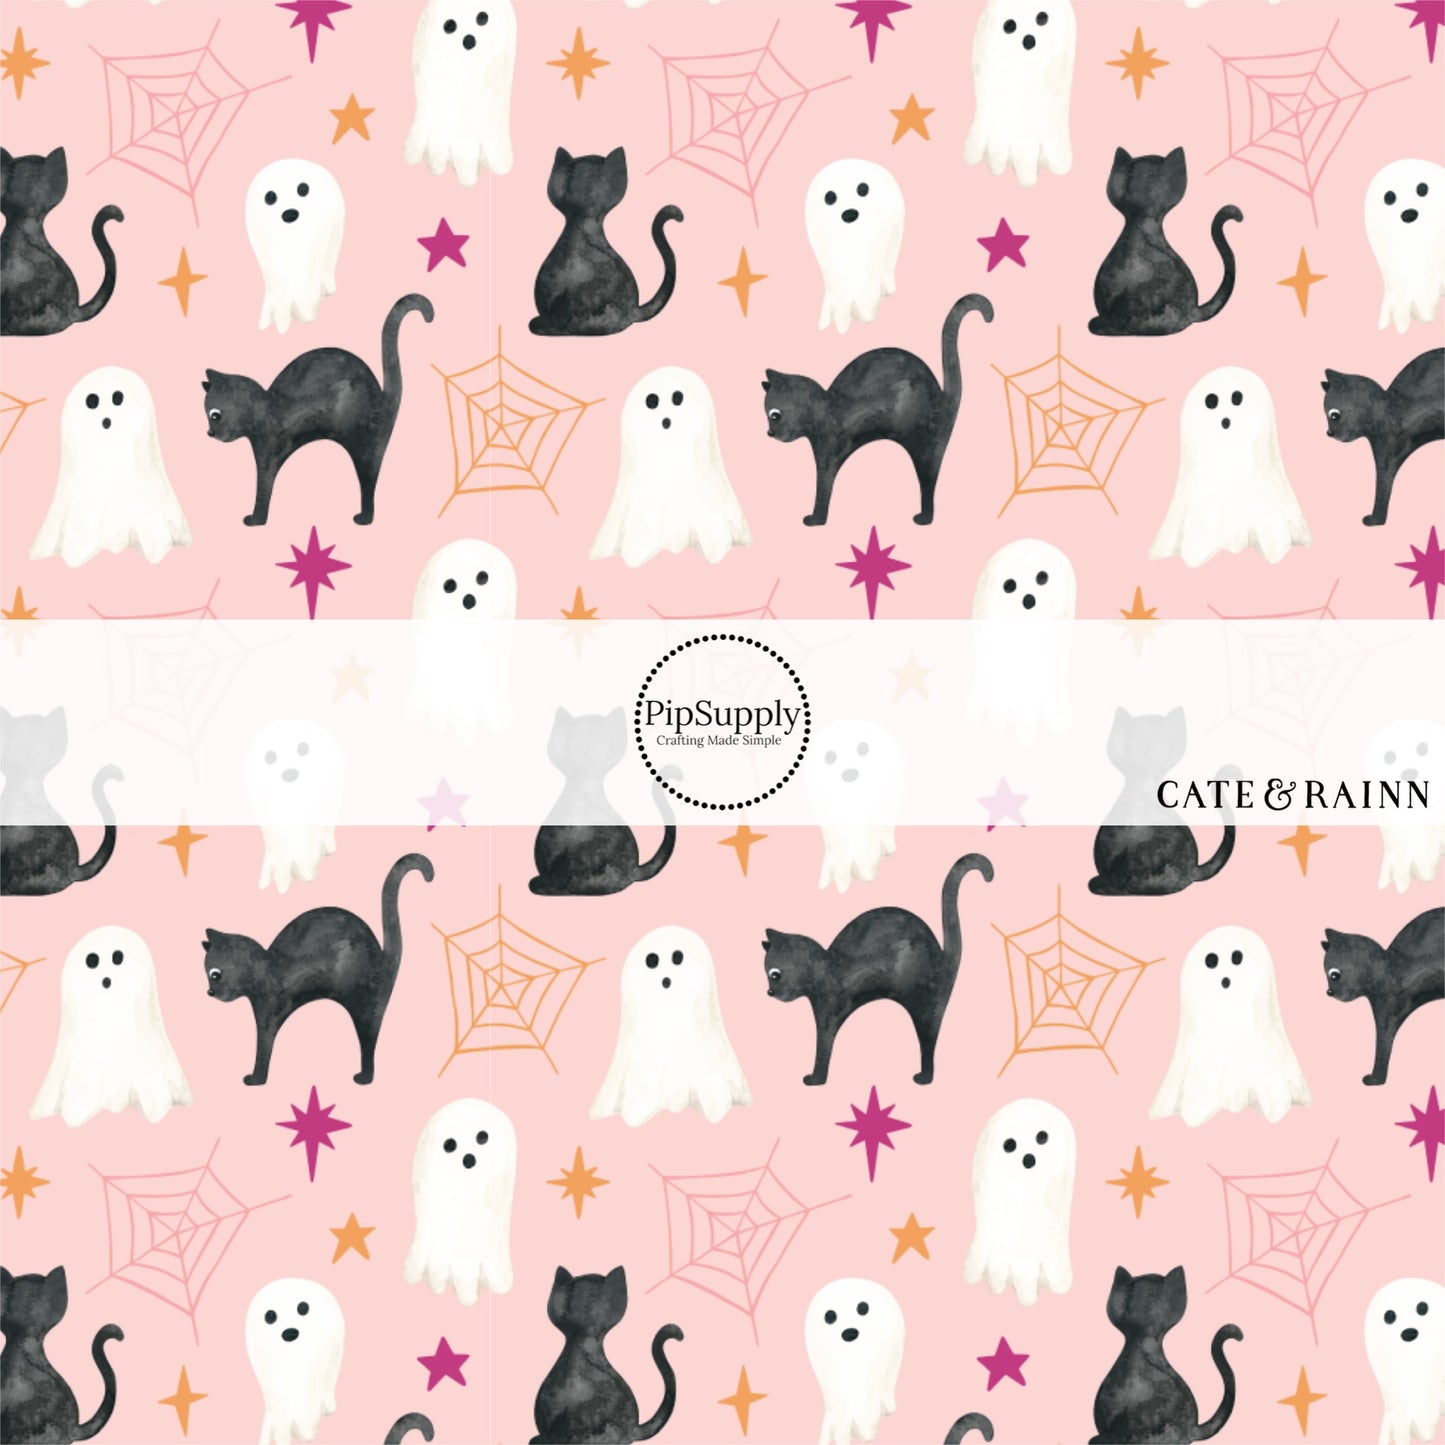 These Halloween themed pastel pink fabric by the yard features black cats, ghost, spiderwebs, and small dark pink and orange stars on pale pink. This fun spooky themed fabric can be used for all your sewing and crafting needs! 